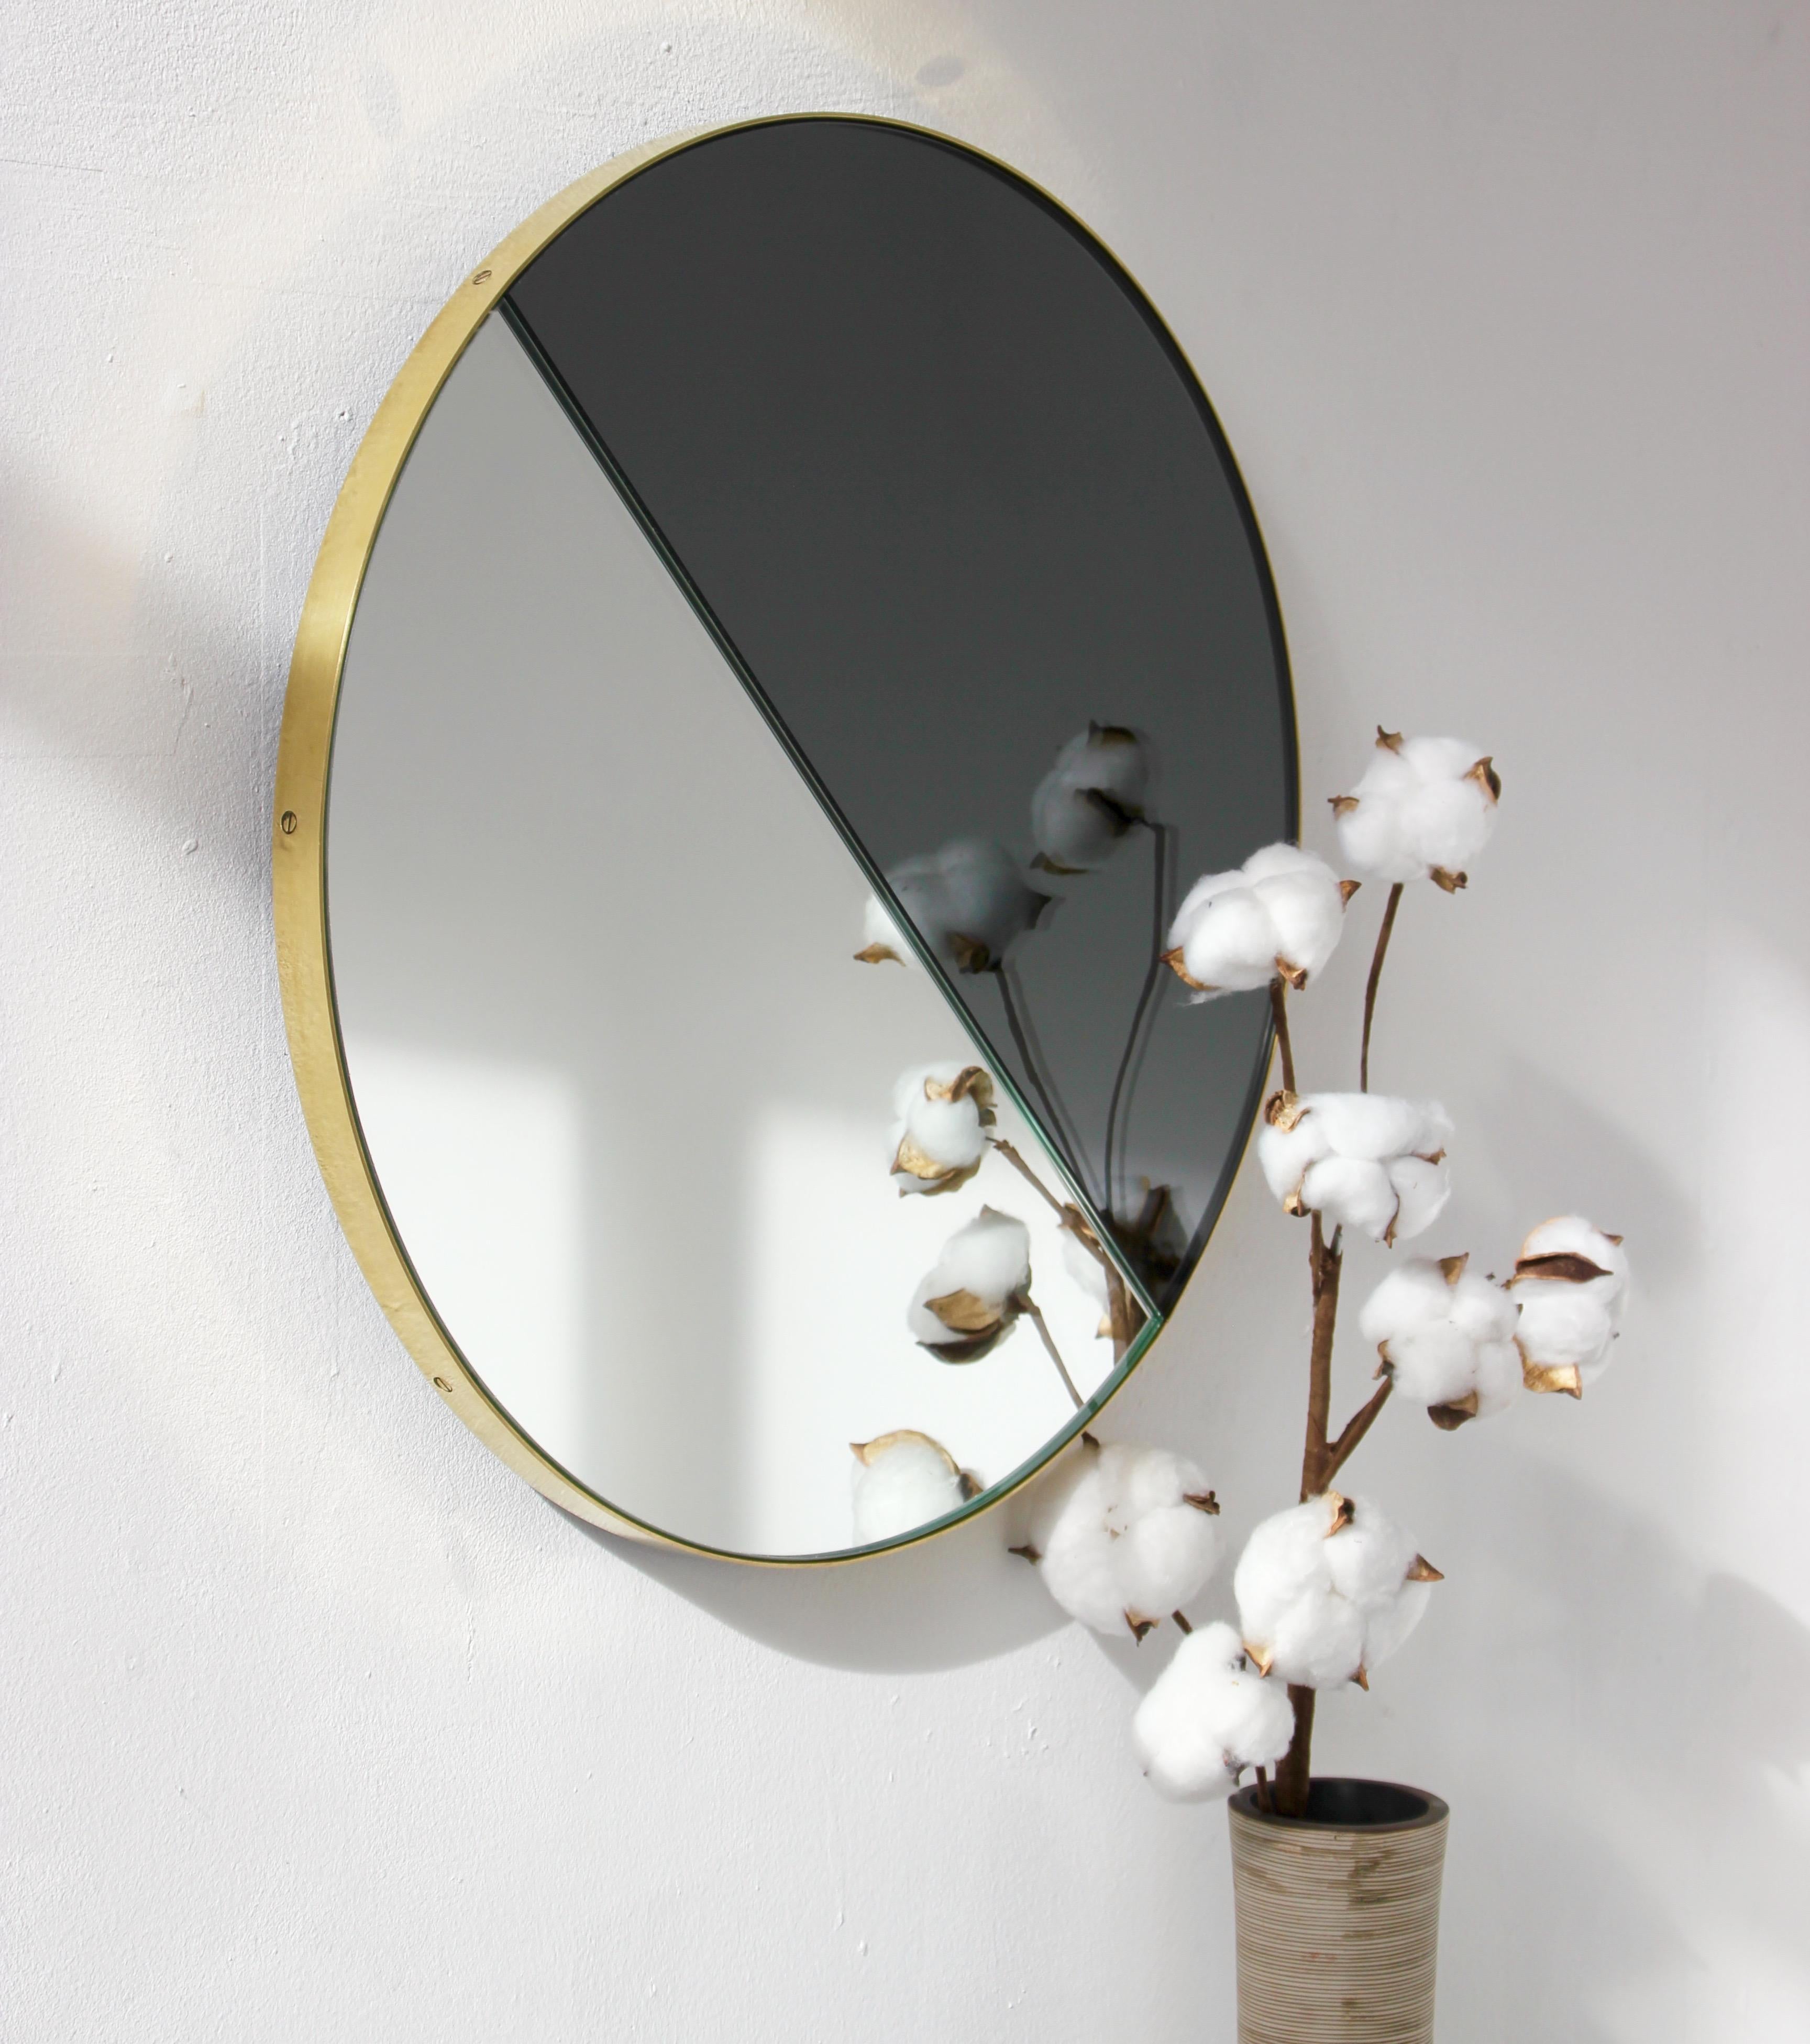 Contemporary mixed black and silver mirror tints Dualis Orbis with a brushed brass frame. Designed and handcrafted in London, UK.

All mirrors are fitted with an ingenious French cleat (split batten) system so they may hang flush with the wall in